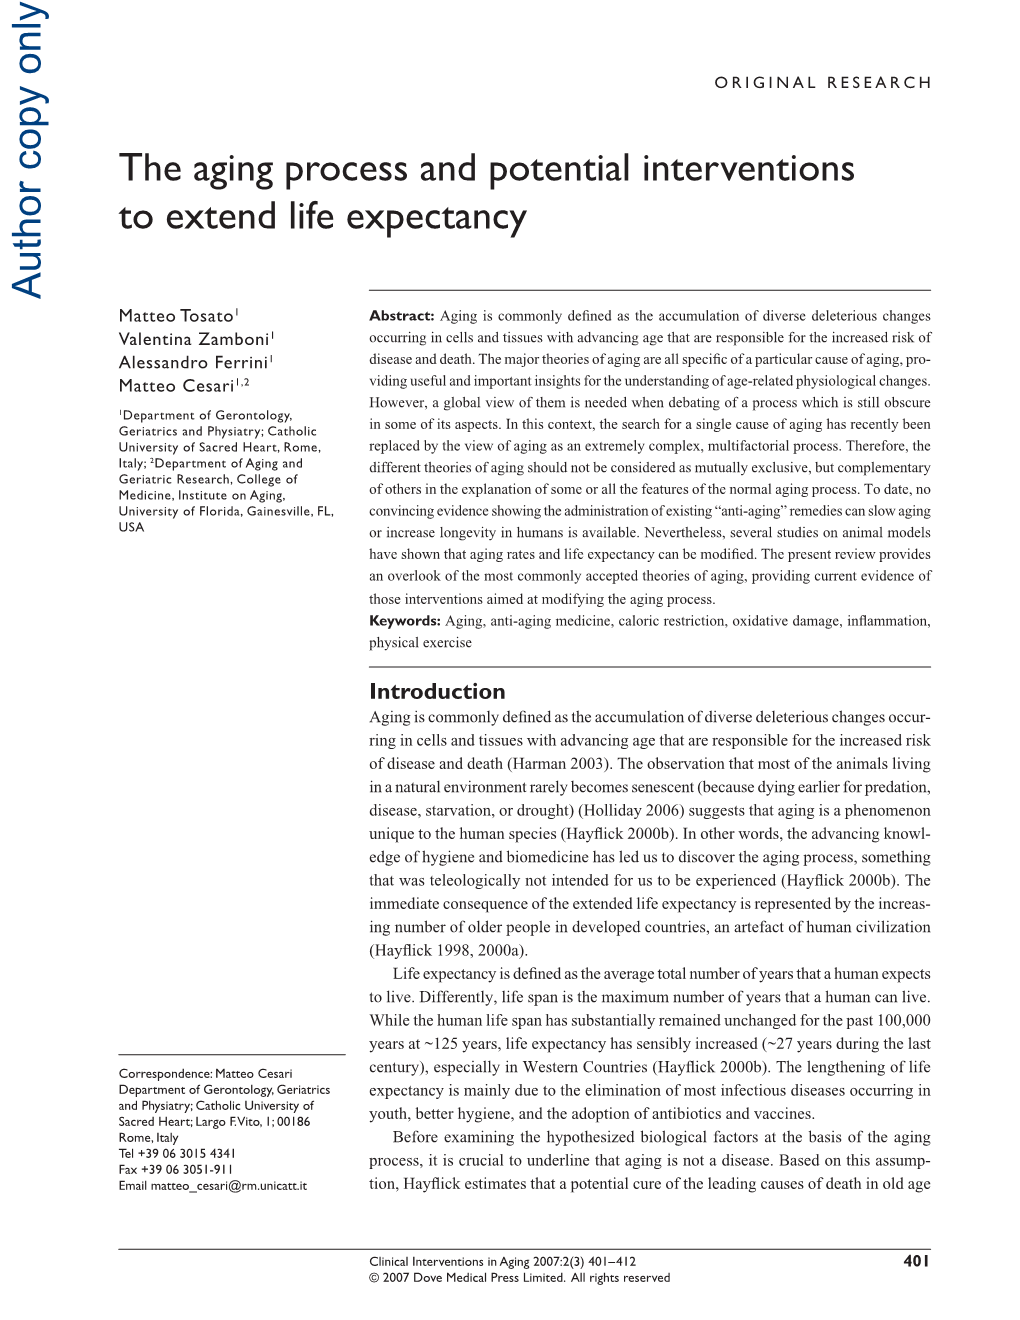 The Aging Process and Potential Interventions to Extend Life Expectancy